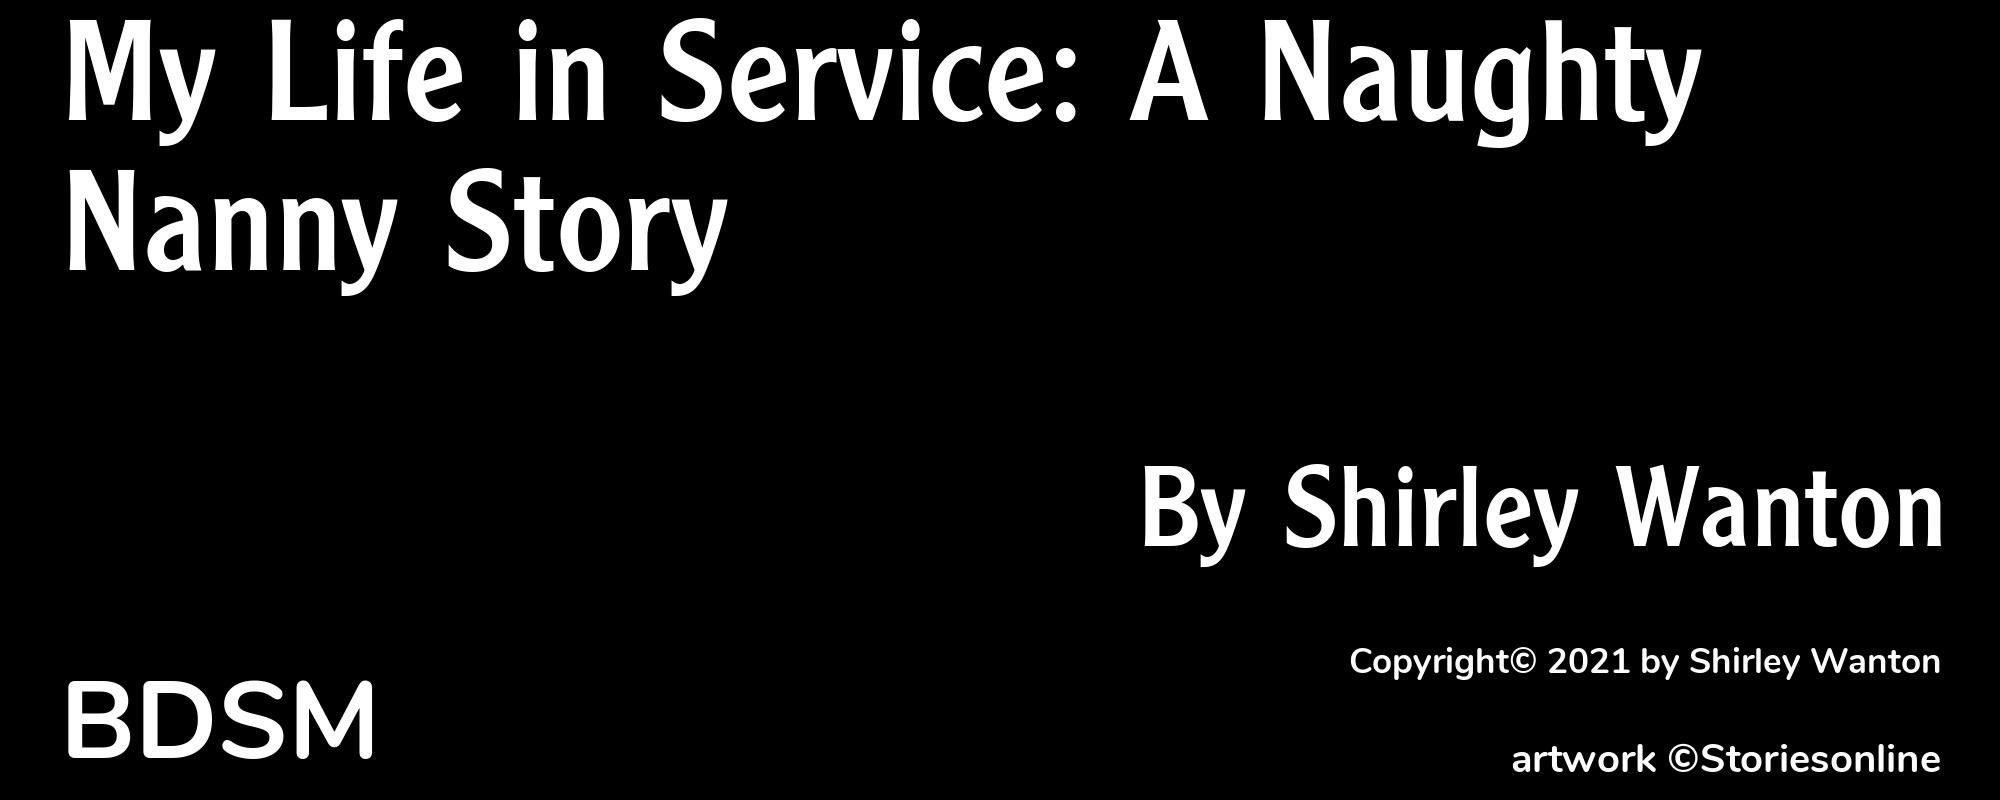 My Life in Service: A Naughty Nanny Story - Cover